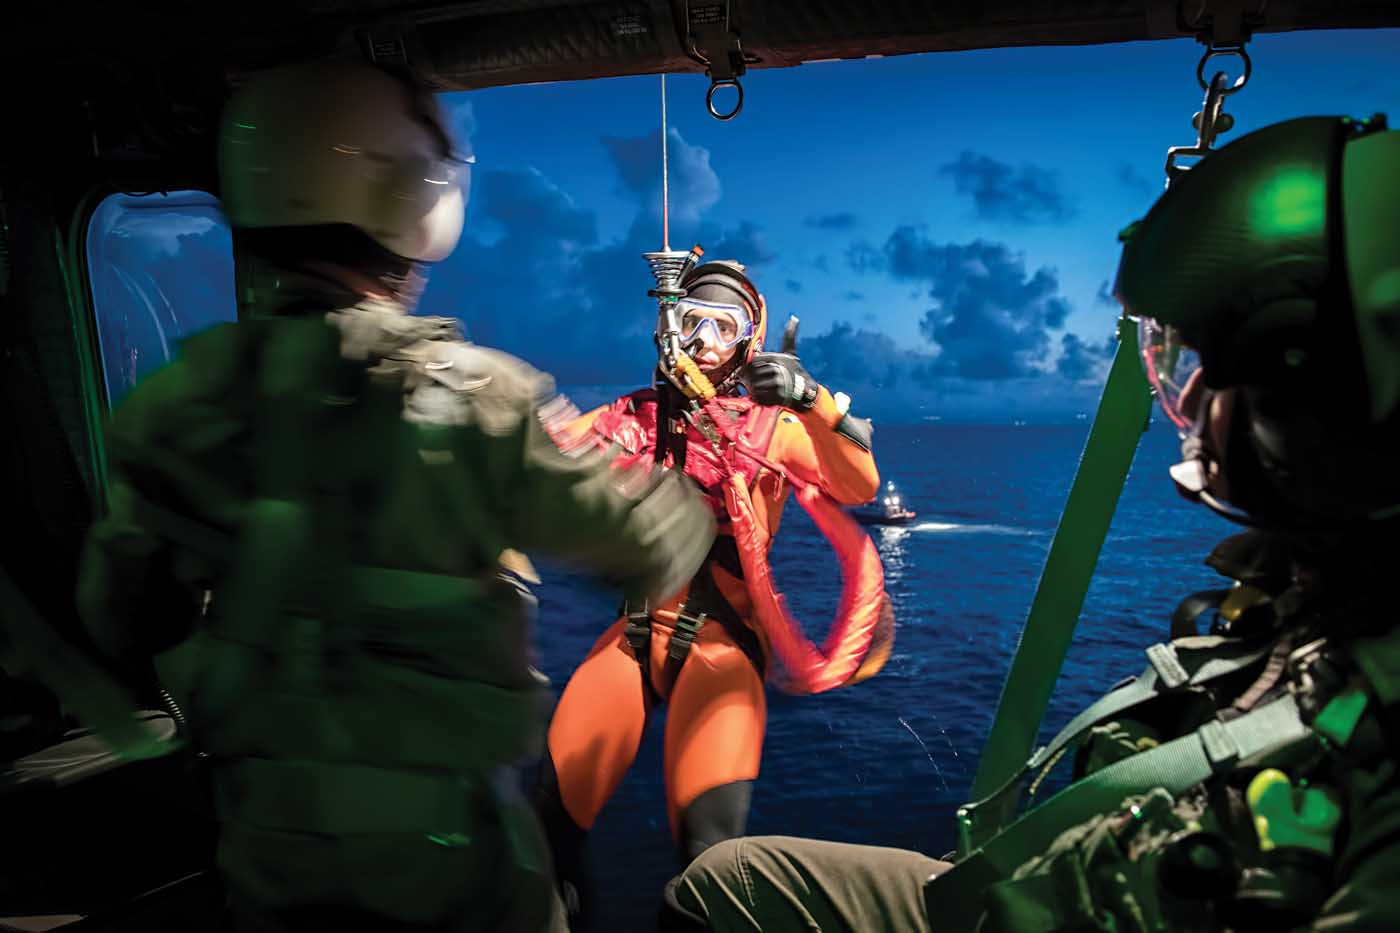 A rescue swimmer gives the thumbs up to the winch operator during a training exercise off the coast of Catania, Sicily, the home of Guardia Costiera’s 2° Nucleo Aereo.